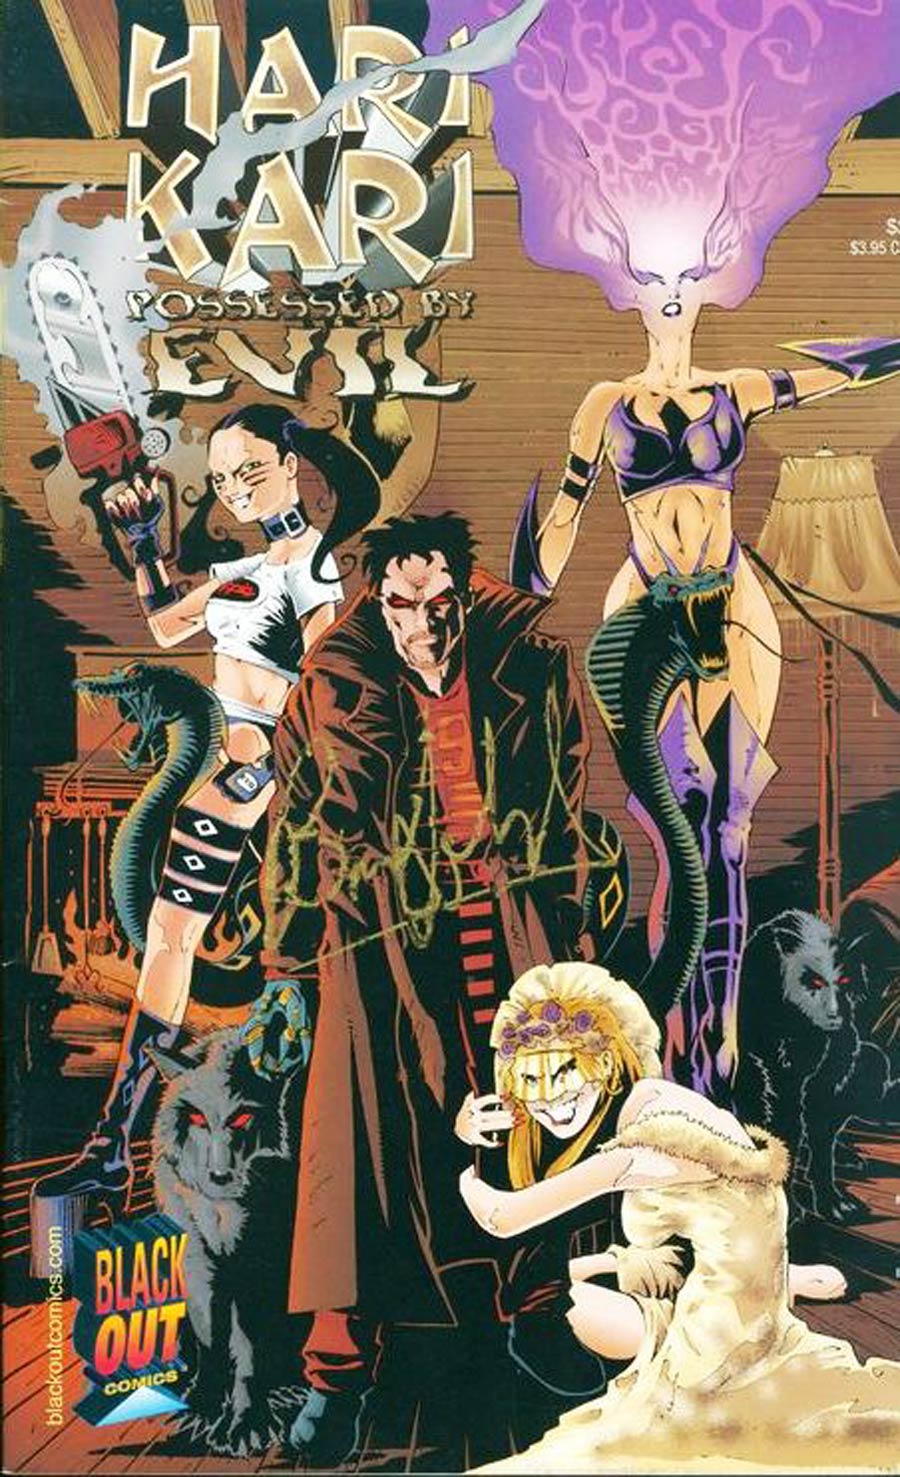 Hari Kari Possessed By Evil #1 Cover B Signed With Certificate